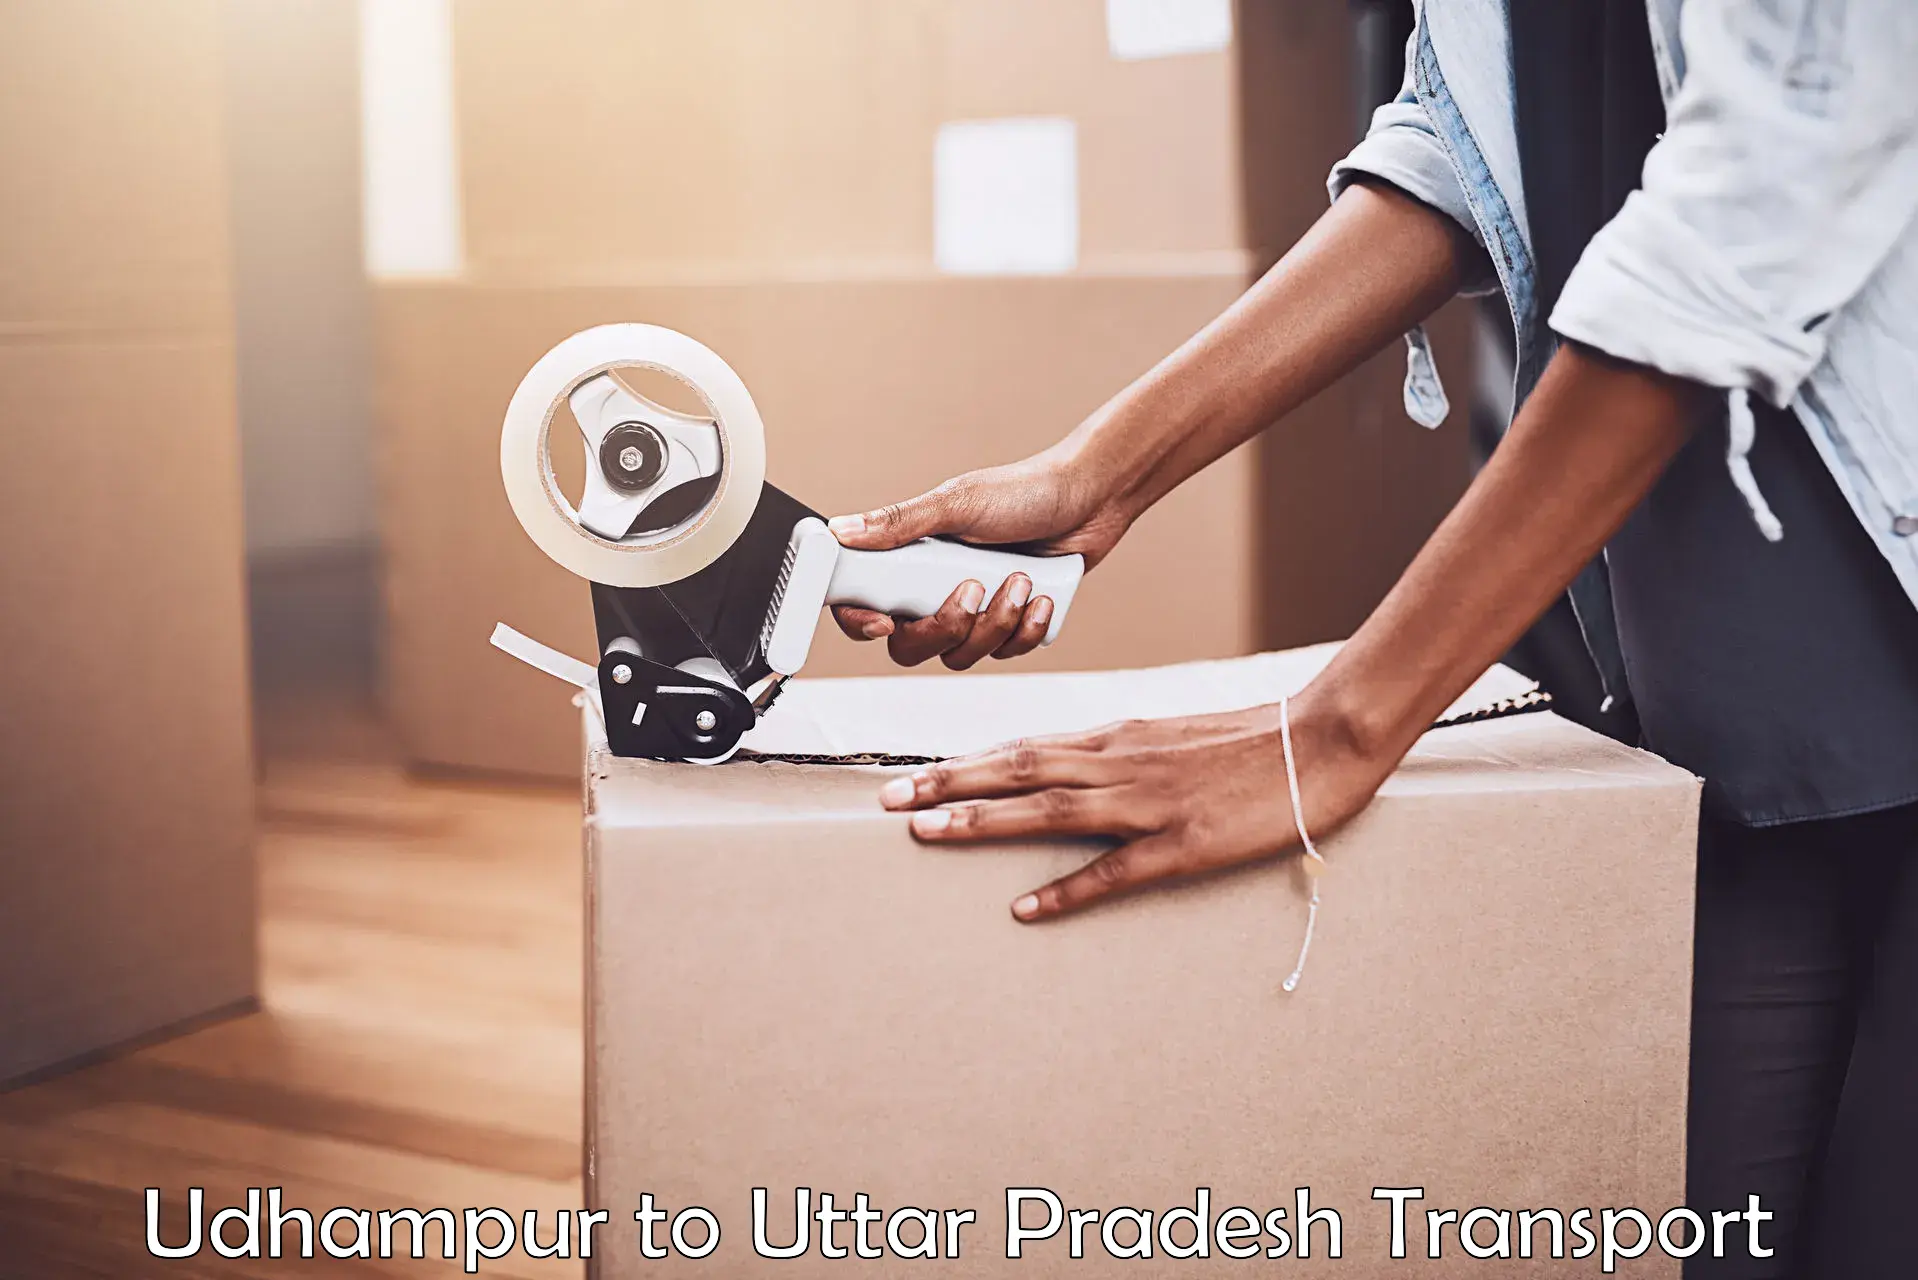 Domestic goods transportation services Udhampur to Fatehabad Agra